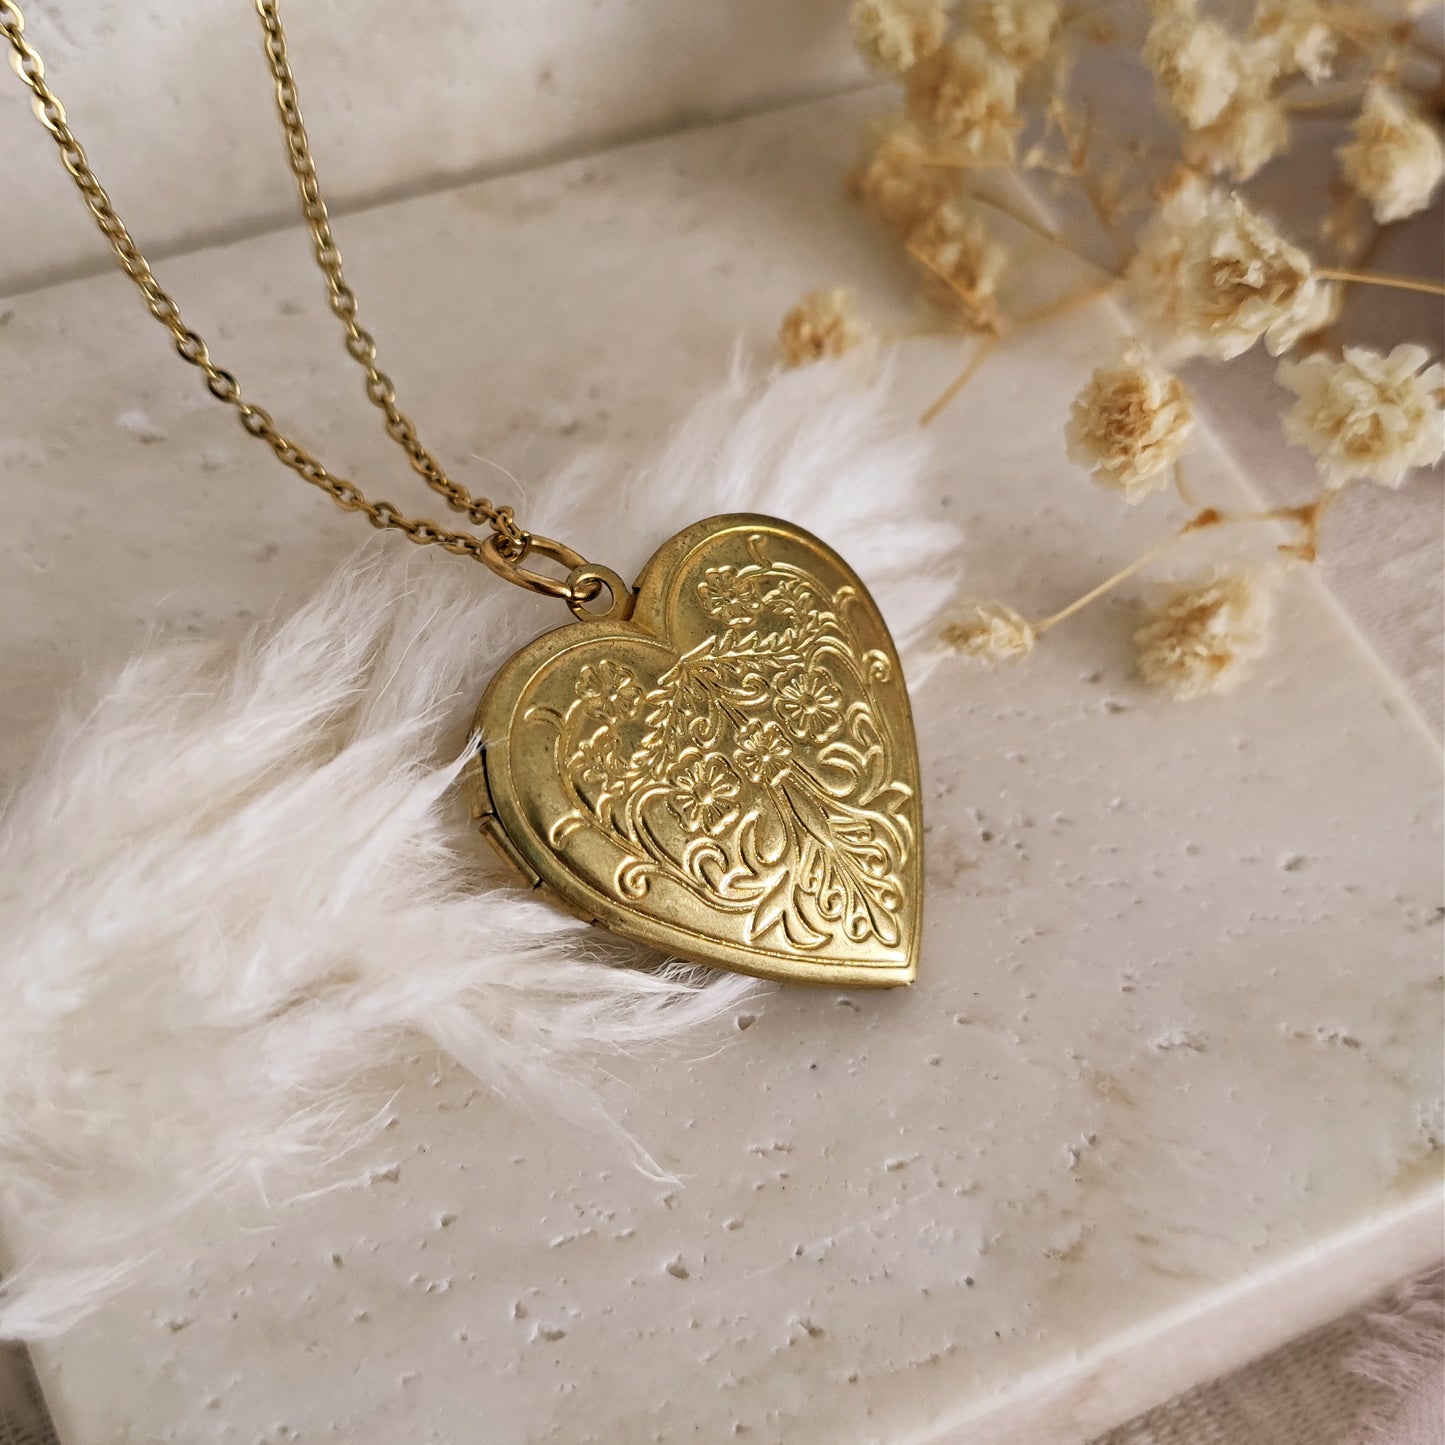 Personalised Heart Locket Necklace with Photo, Brass Floral Locket with Picture, Art Deco Photo Necklace, Victorian Engraved Locket Necklace